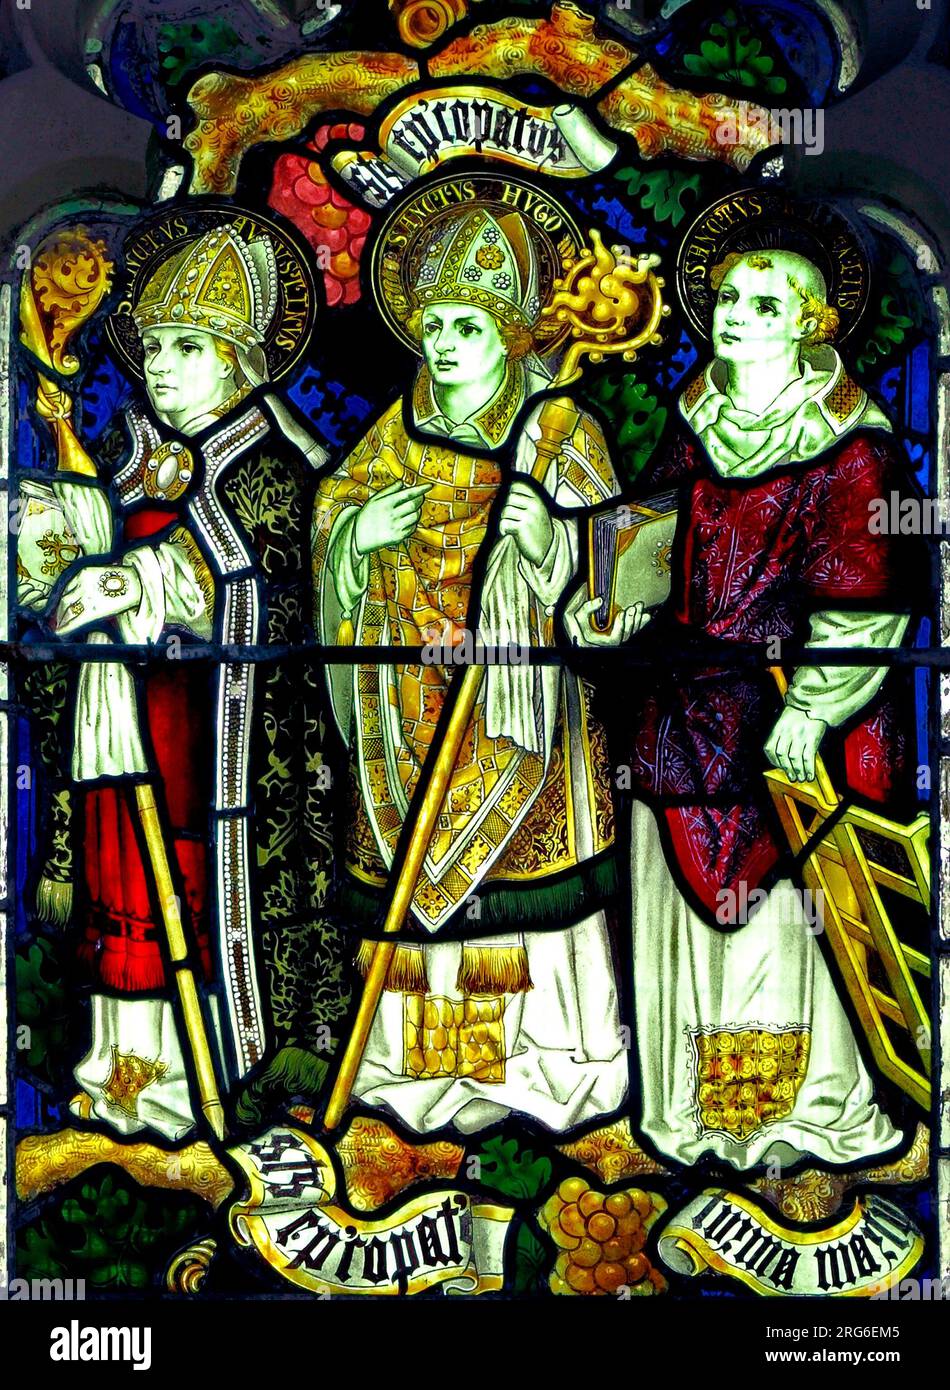 St. Augustine, St. Hugo, St. Laurentius or St. Lawrence, martyr, stained glass window by Charles Kempe, 1879, Stanhoe church, Norfolk, England Stock Photo